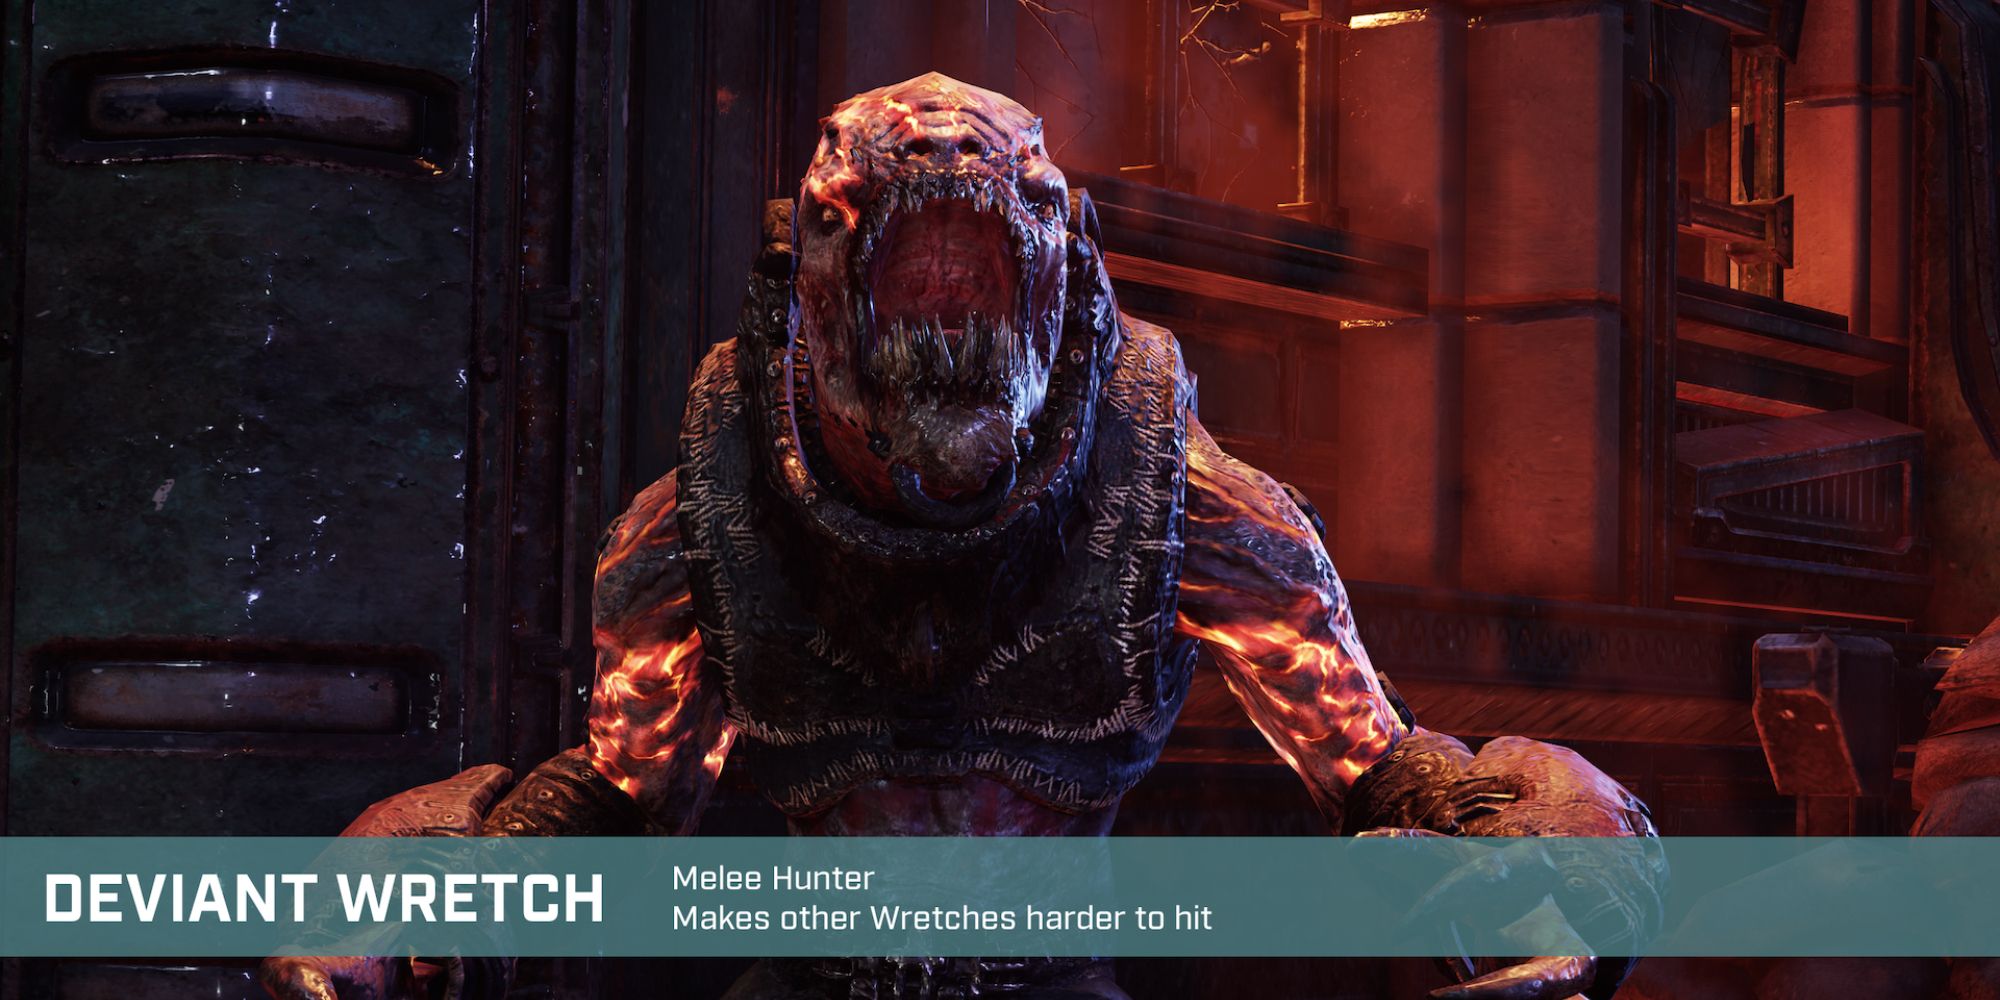 Gears Tactics a close up of a Deviant Wretch with its name and description at the bottom of the image